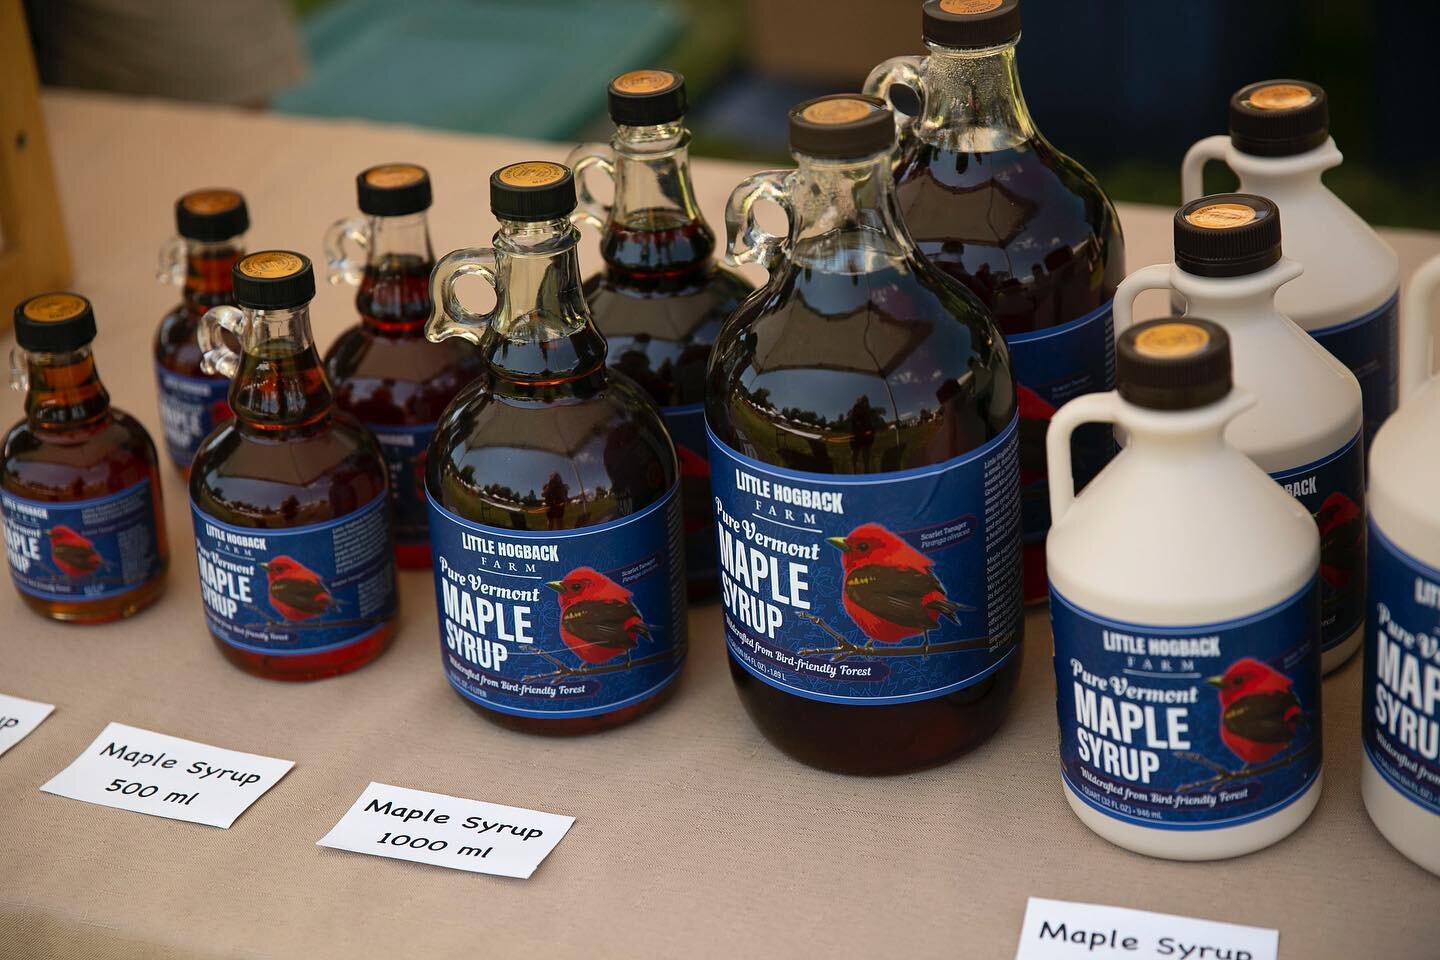 @littlehogbackfarm is a bird friendly 800-tap operation nestled in the Green Mountains of Vermont. They use sustainable forest management practices to produce the highest quality pure Vermont maple products, and lucky for us, they are a valued member